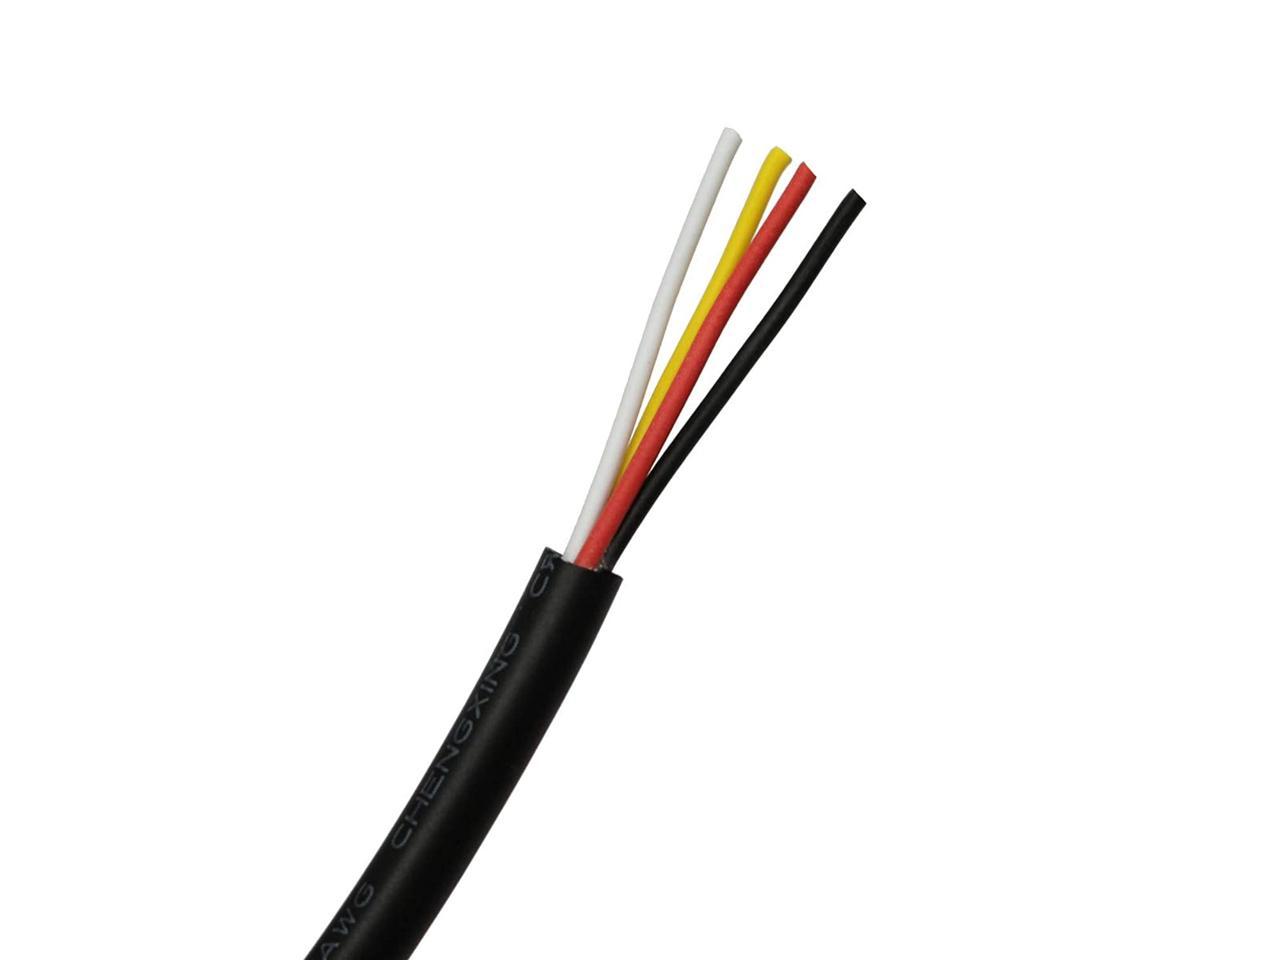 16awg Ul2464 Power Cable Led Red & Black & Yellow & White 4 Conductors 25ft